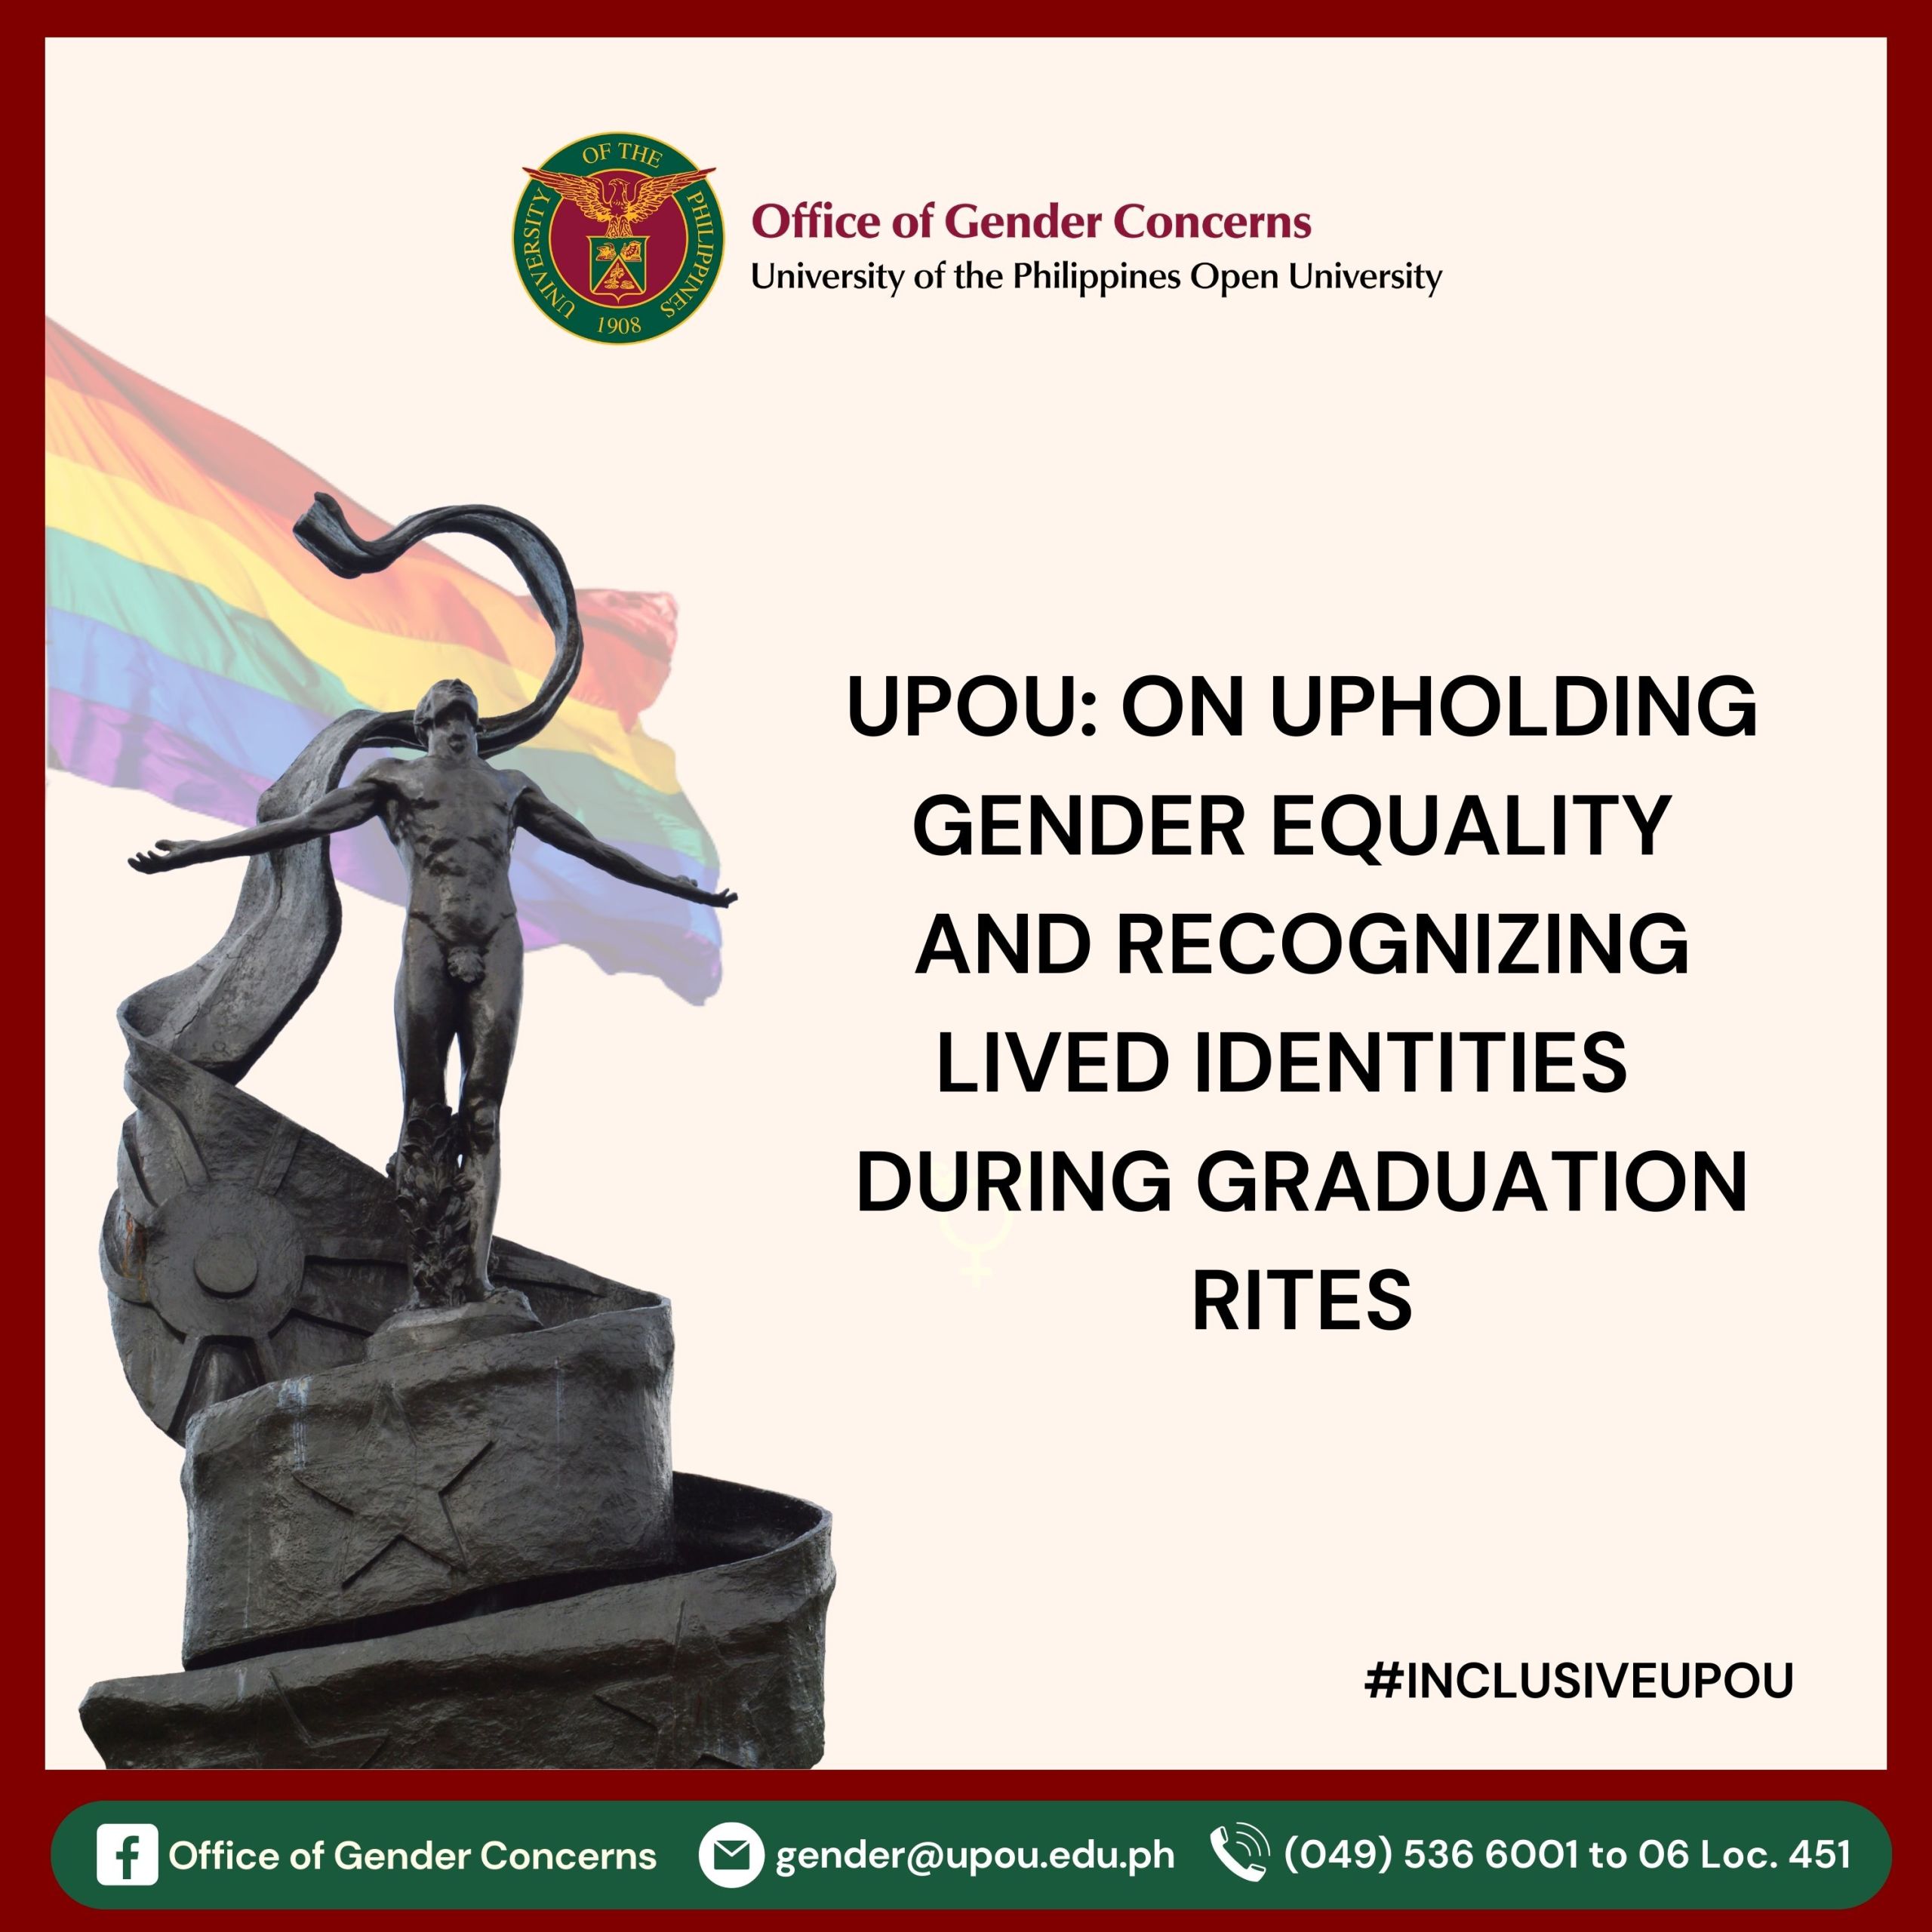 UPOU: ON UPHOLDING GENDER EQUALITY AND RECOGNIZING LIVED IDENTITIES DURING GRADUATION RITES